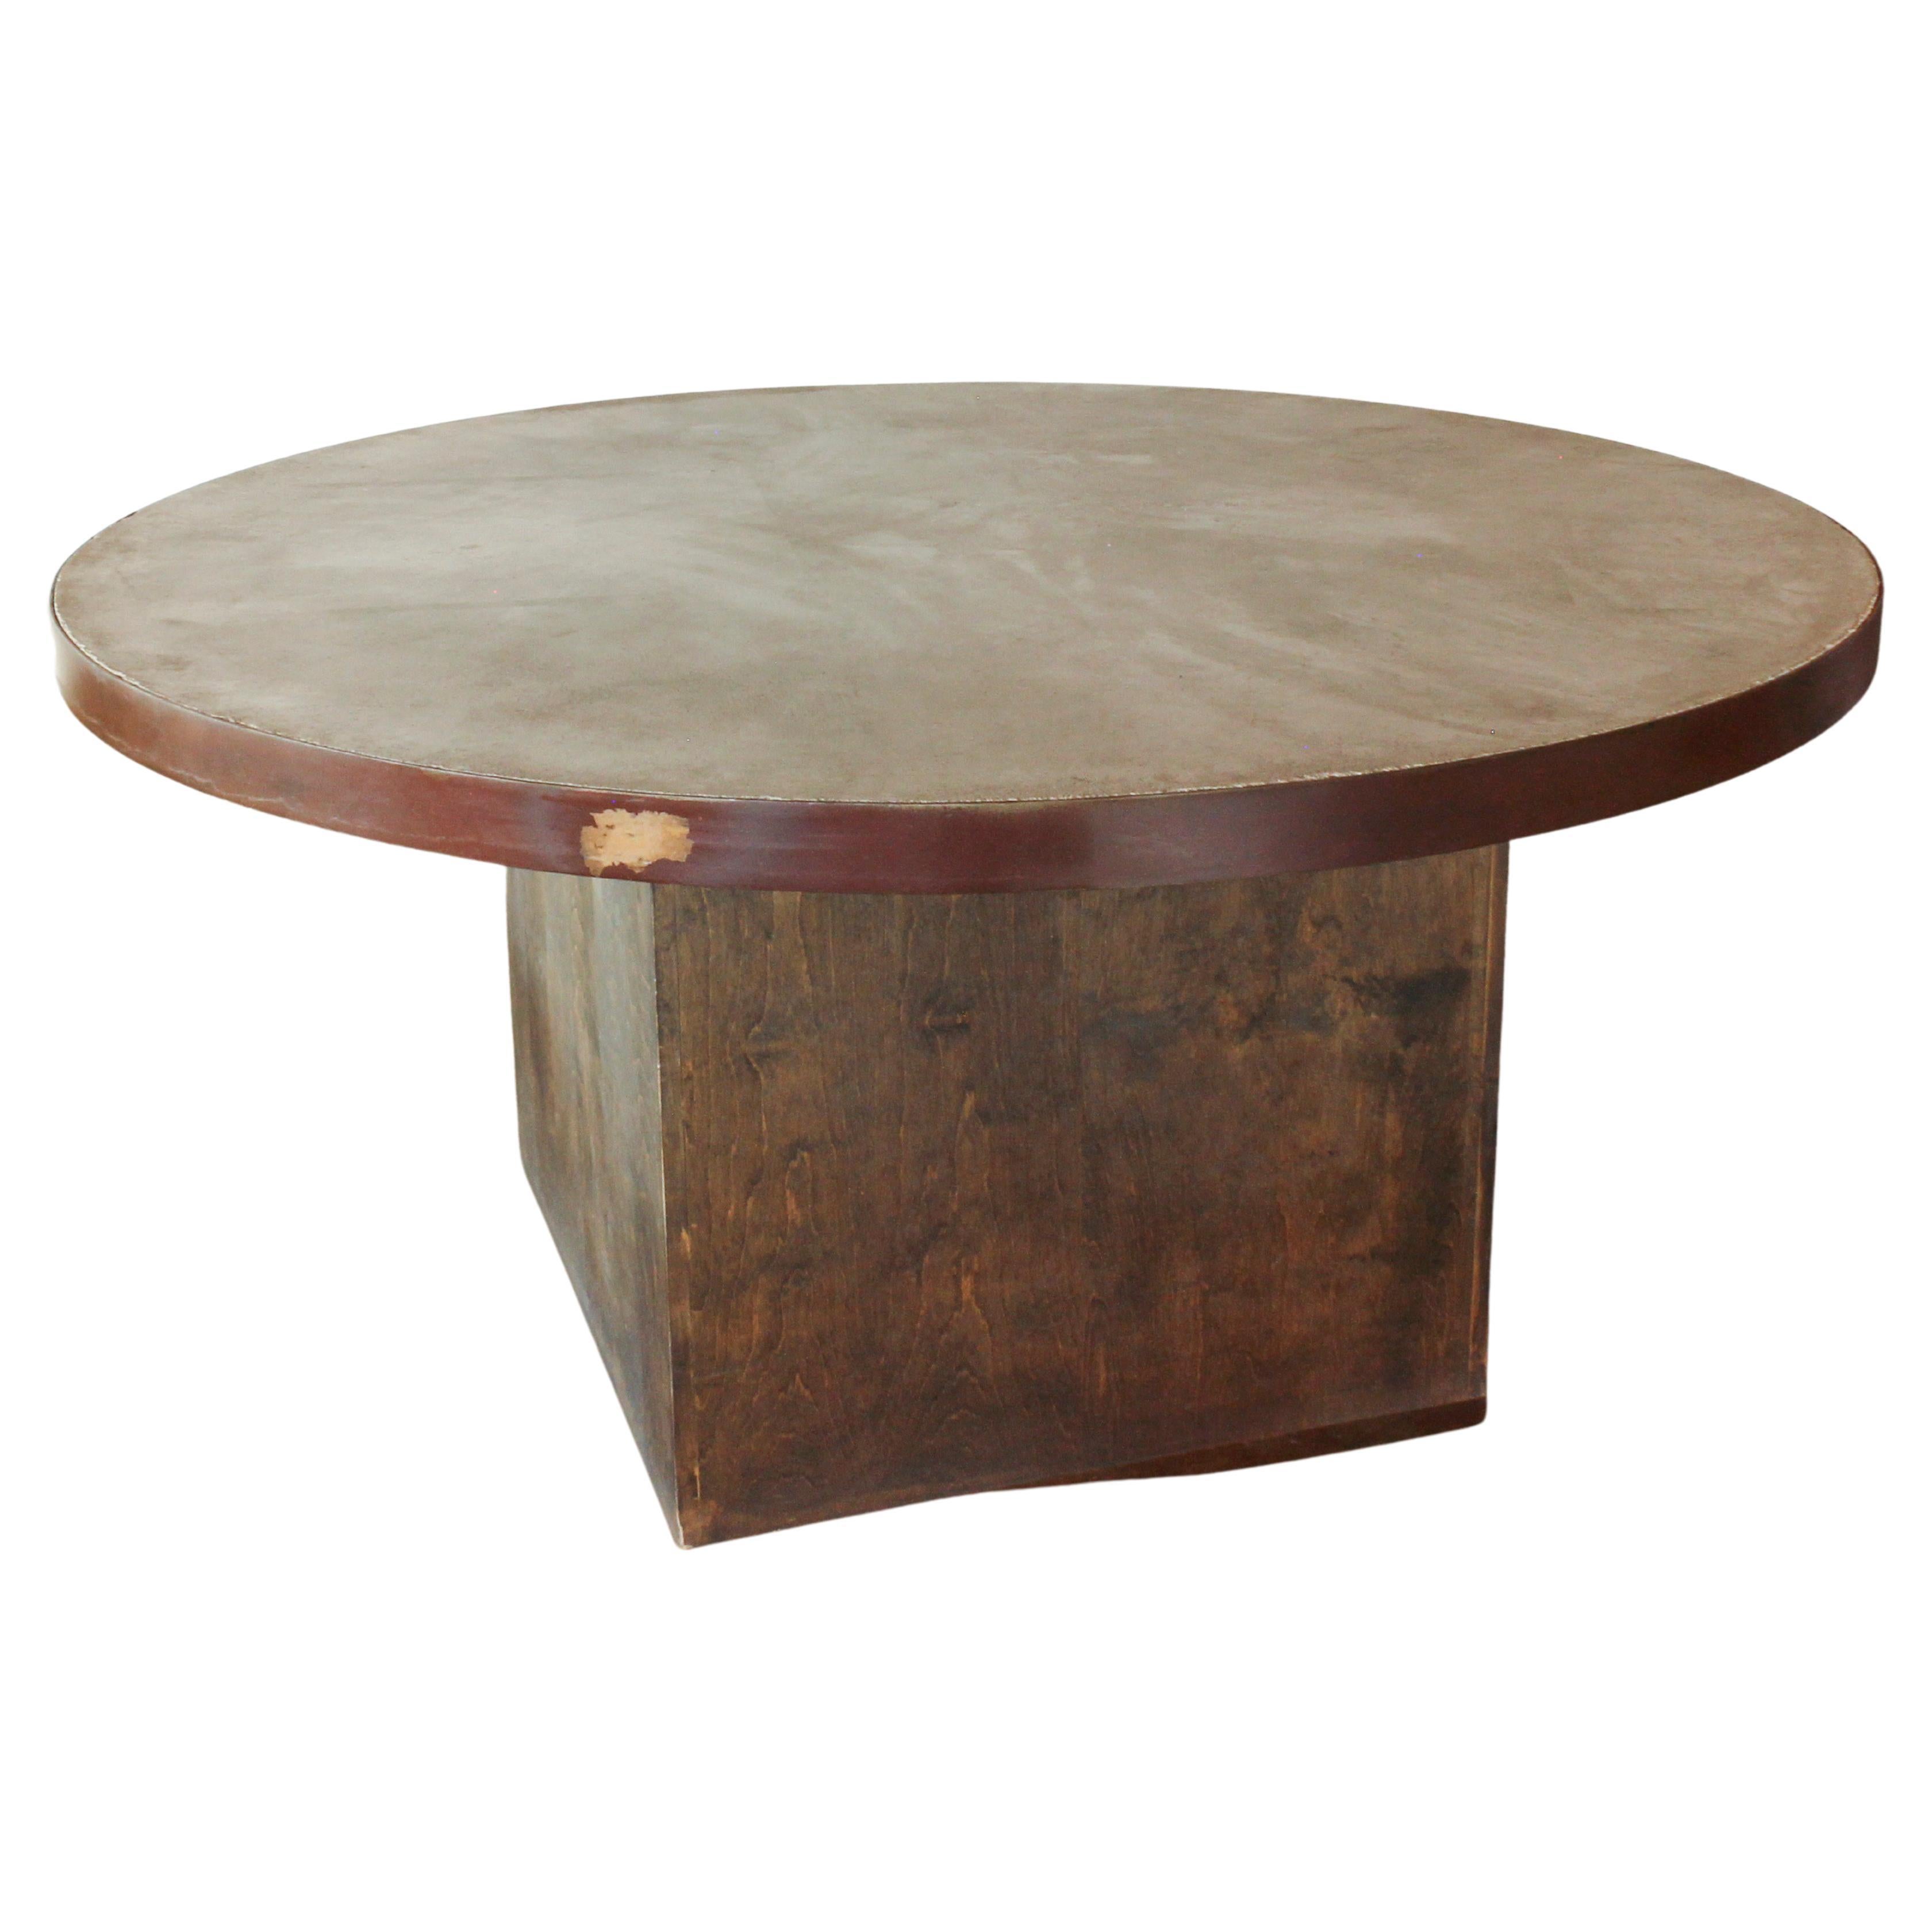 Round Pedestal Dining Table with Concrete Top For Sale